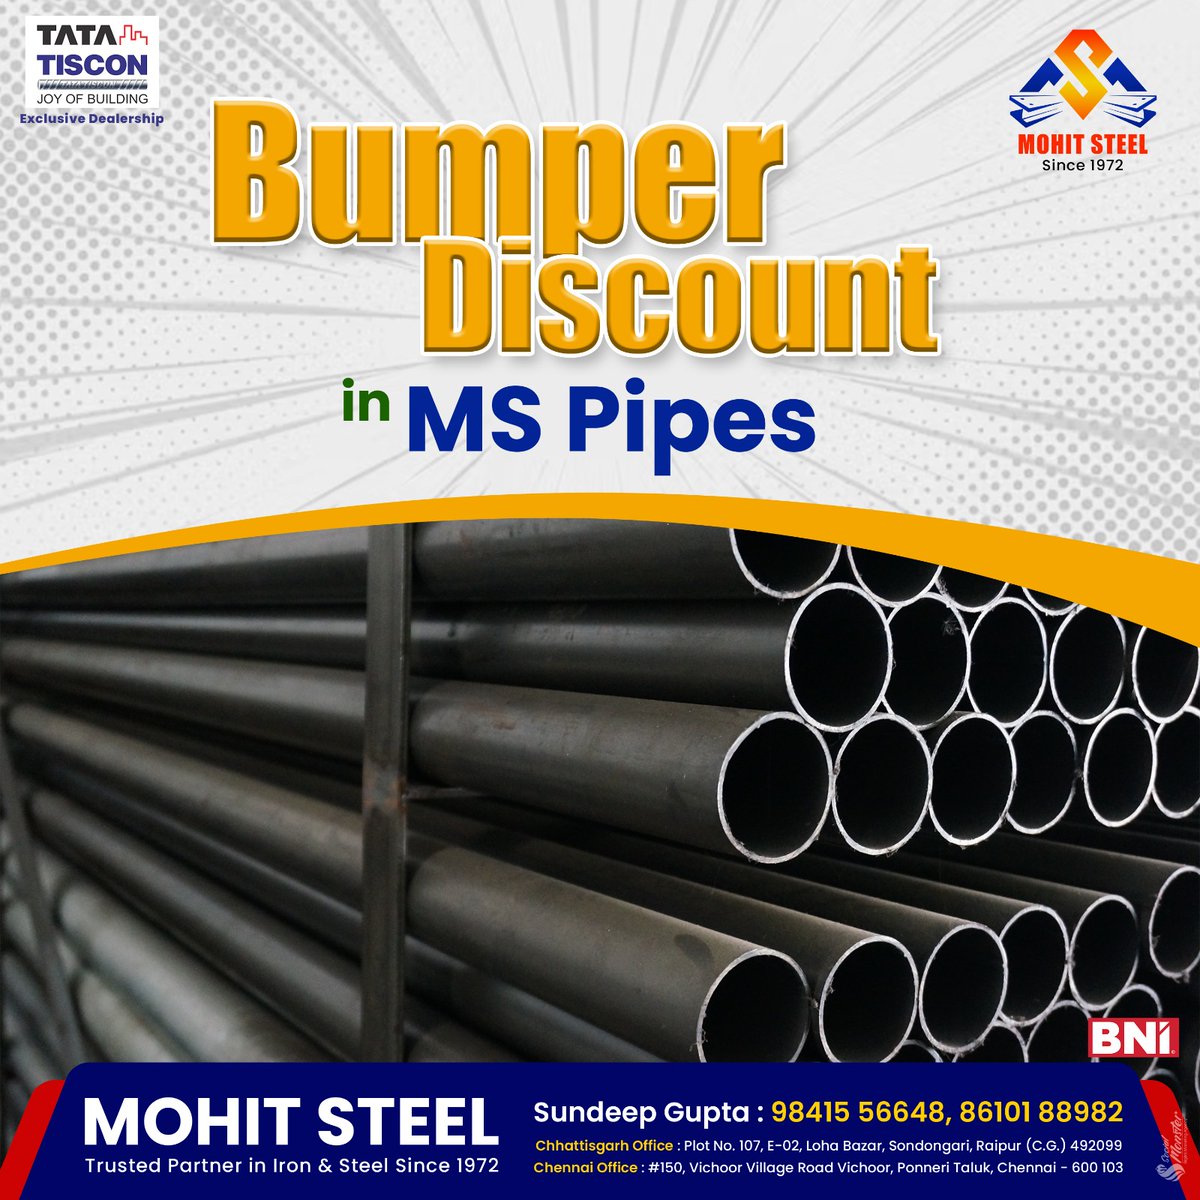 Hurry Don't miss out on bumper discounts for MS pipes at Mohot Steel🔥 Get yours now
.
.
.
 #brighttmt #concreterebars #ramatmt #jindalsteel #raipur #housebuilders #flexistrong #mohitsteelncy